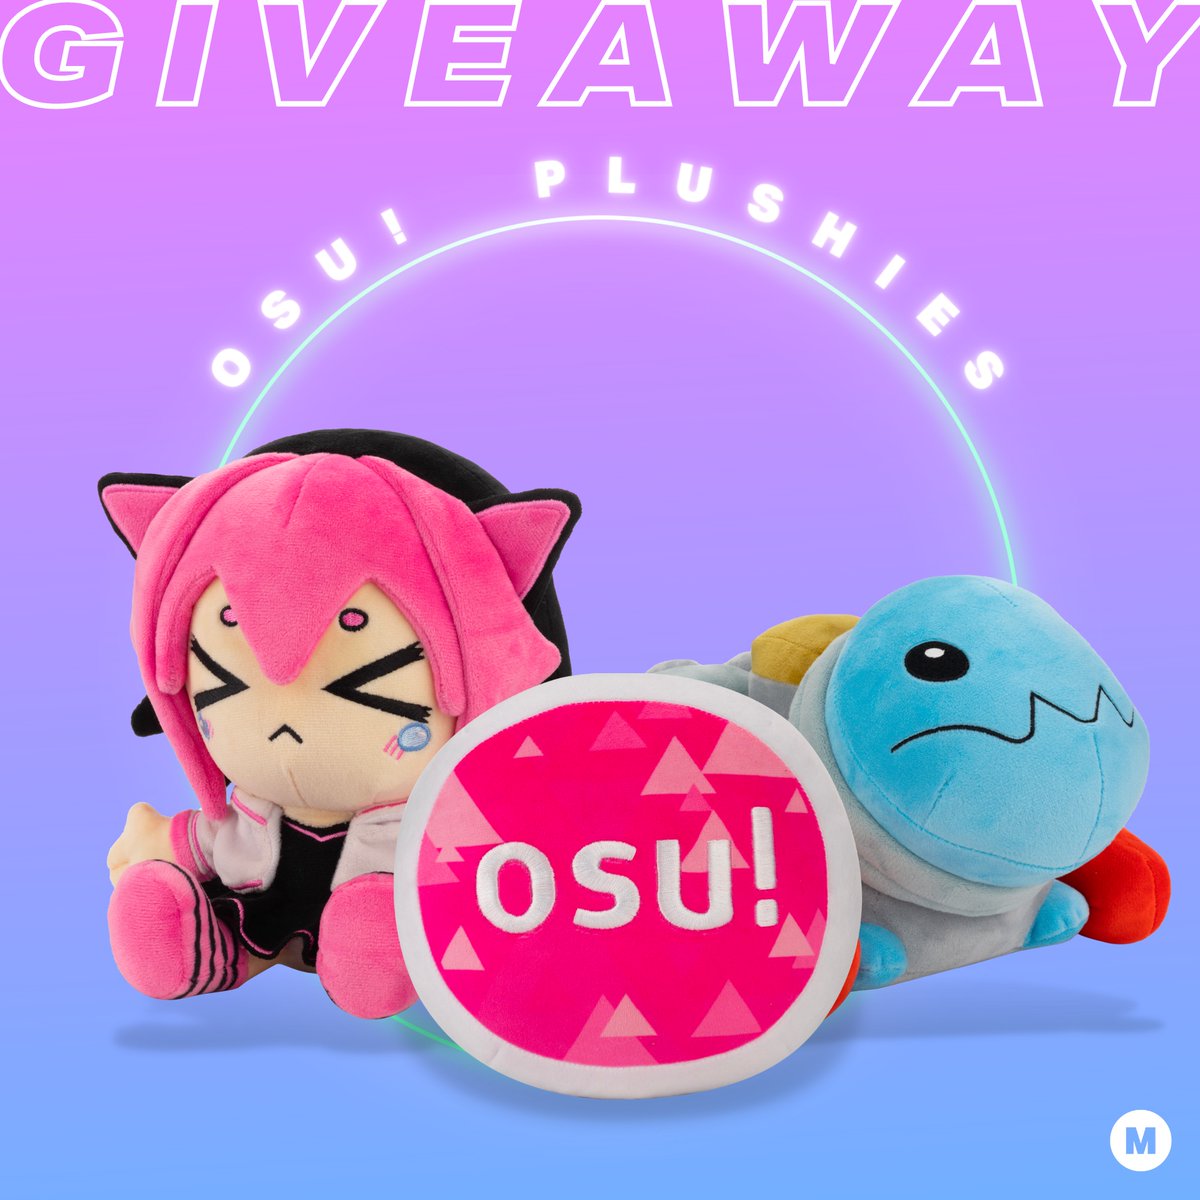 osu! on X: in partnership with @Monstercat, we're excited to